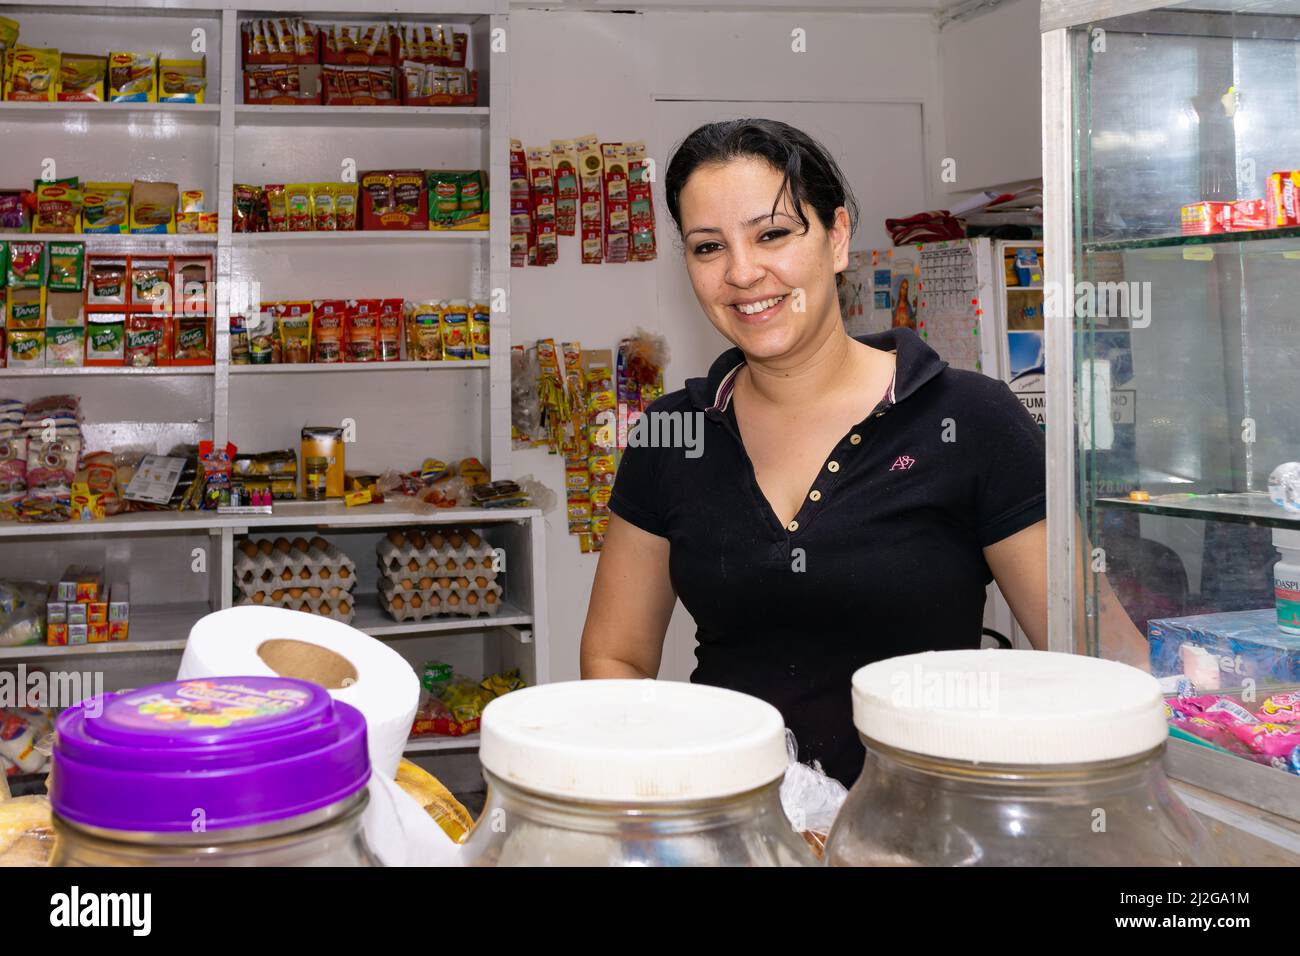 A Nicaraguan woman at her store's counter after a store renovation and expansion. Stock Photo